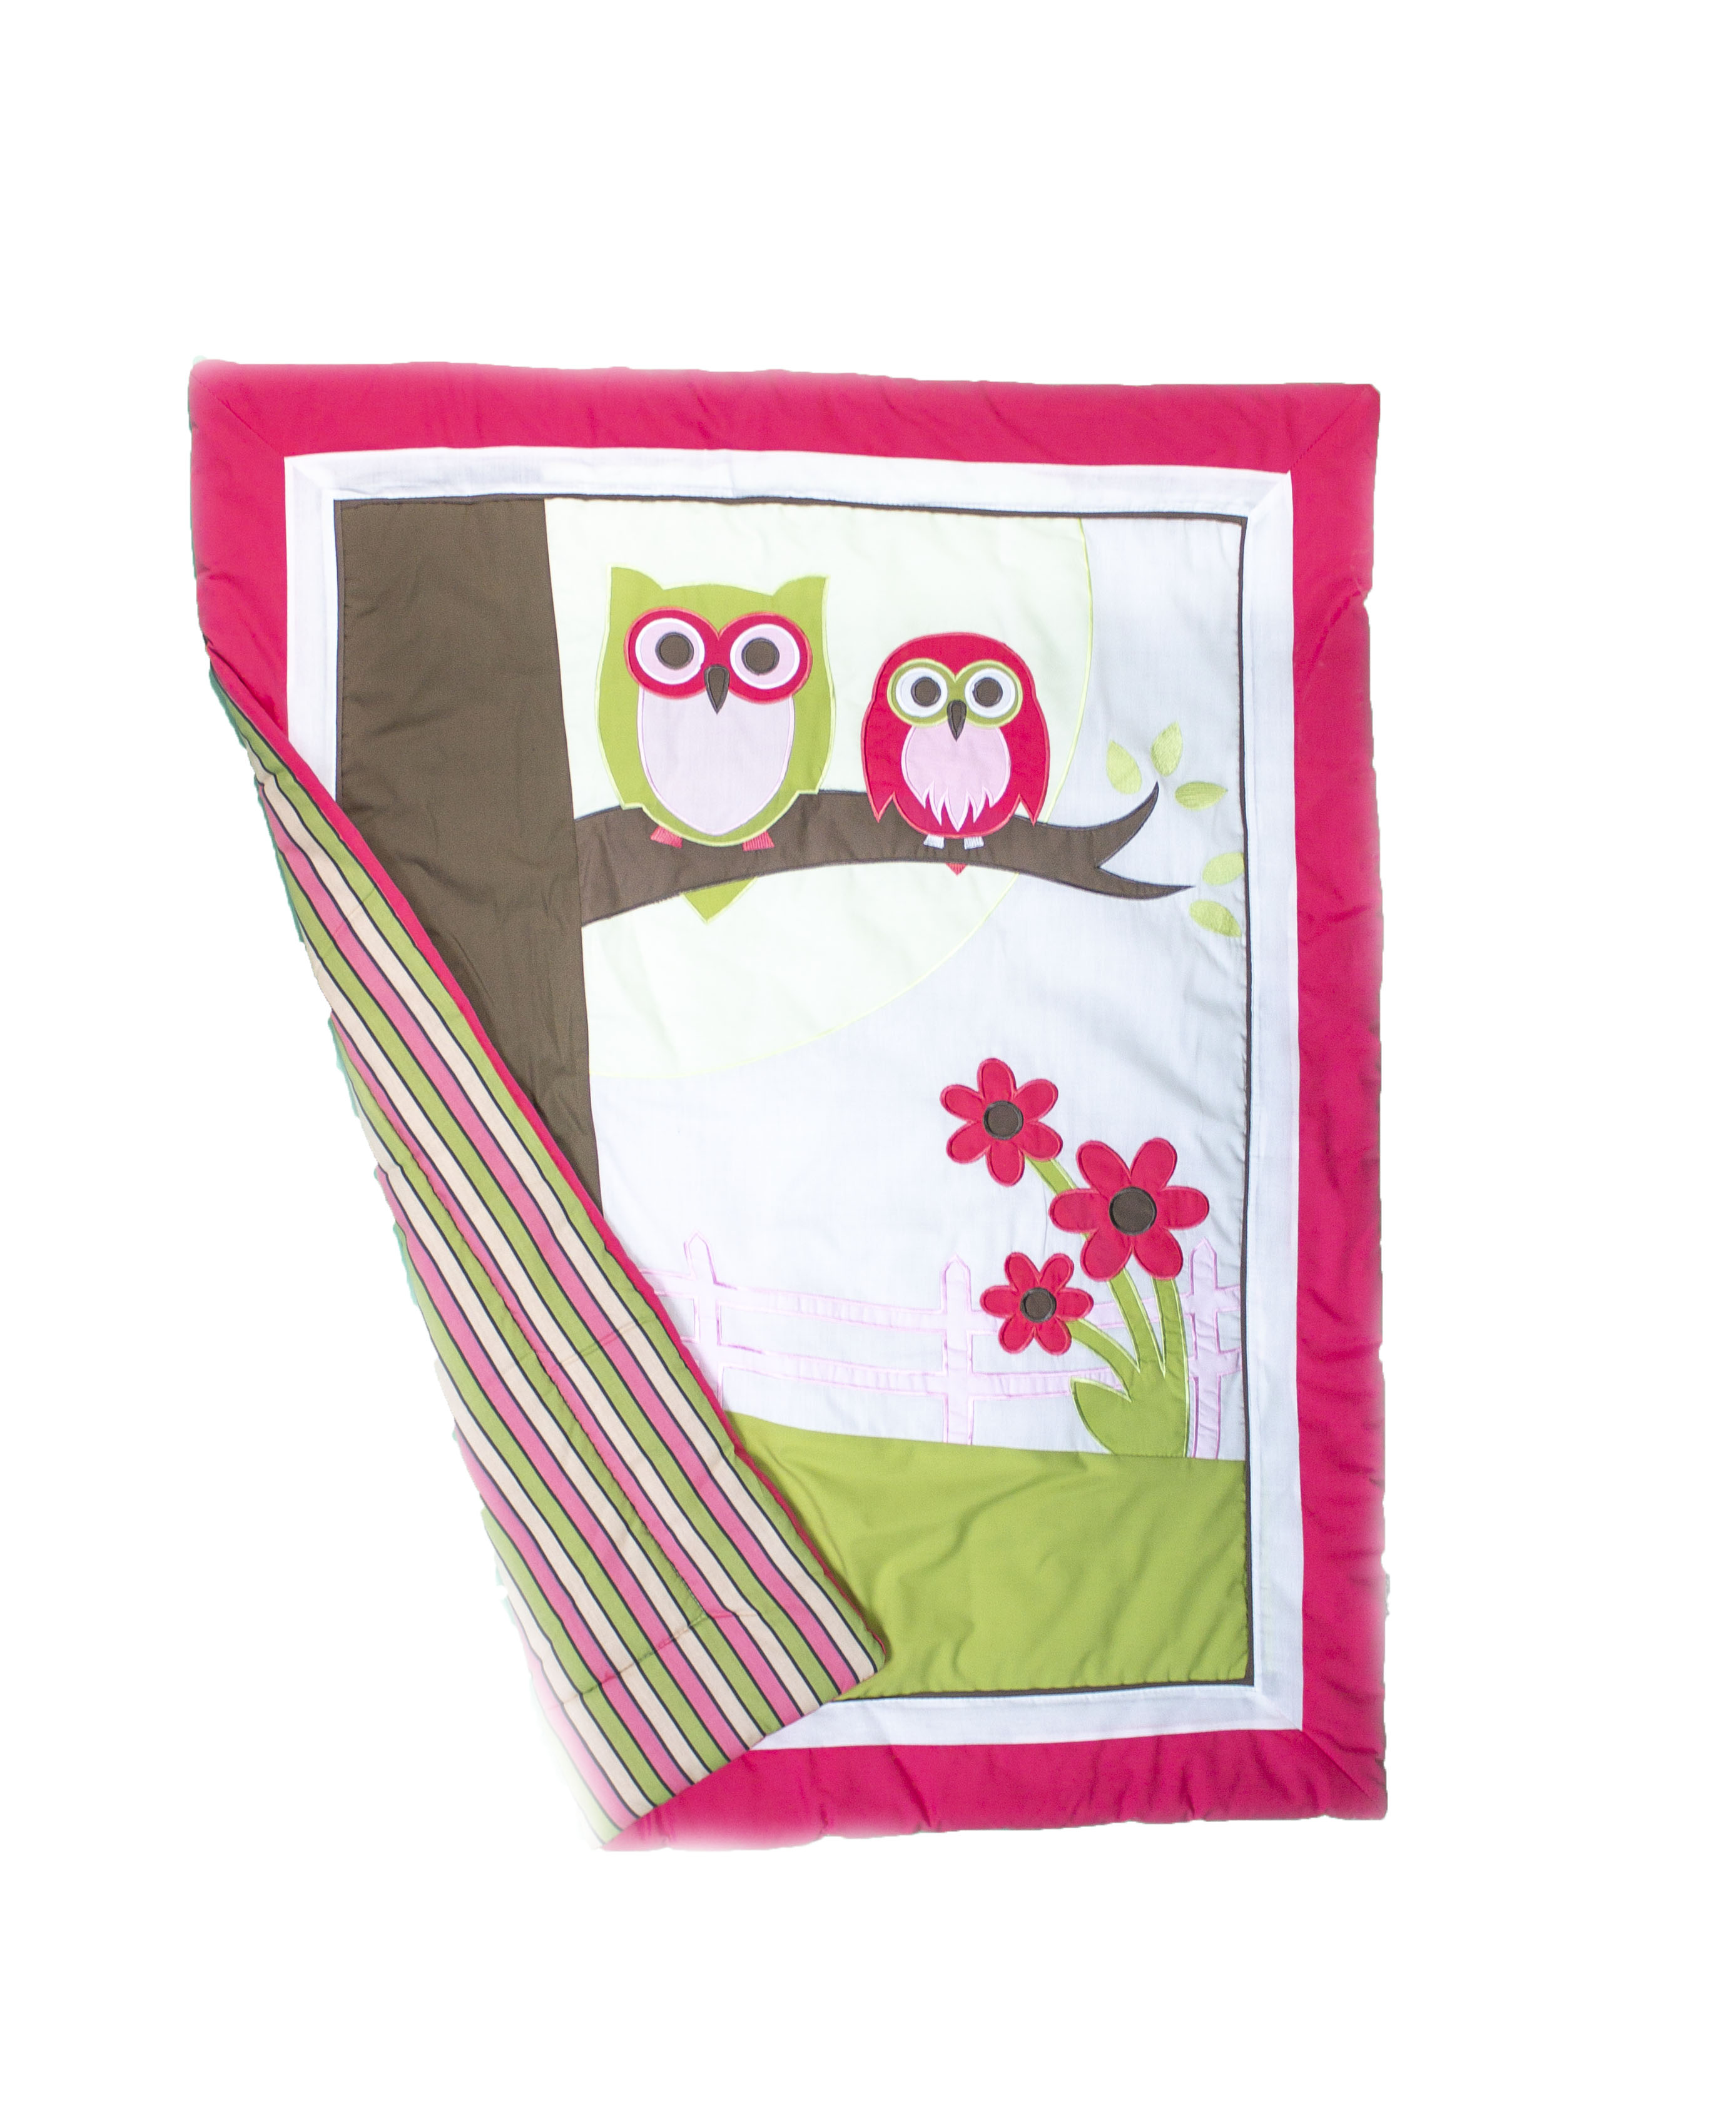 Pam Grace Creations Pink Owl 10 Piece Crib Bedding Set for Girls / Pink/White - image 3 of 11